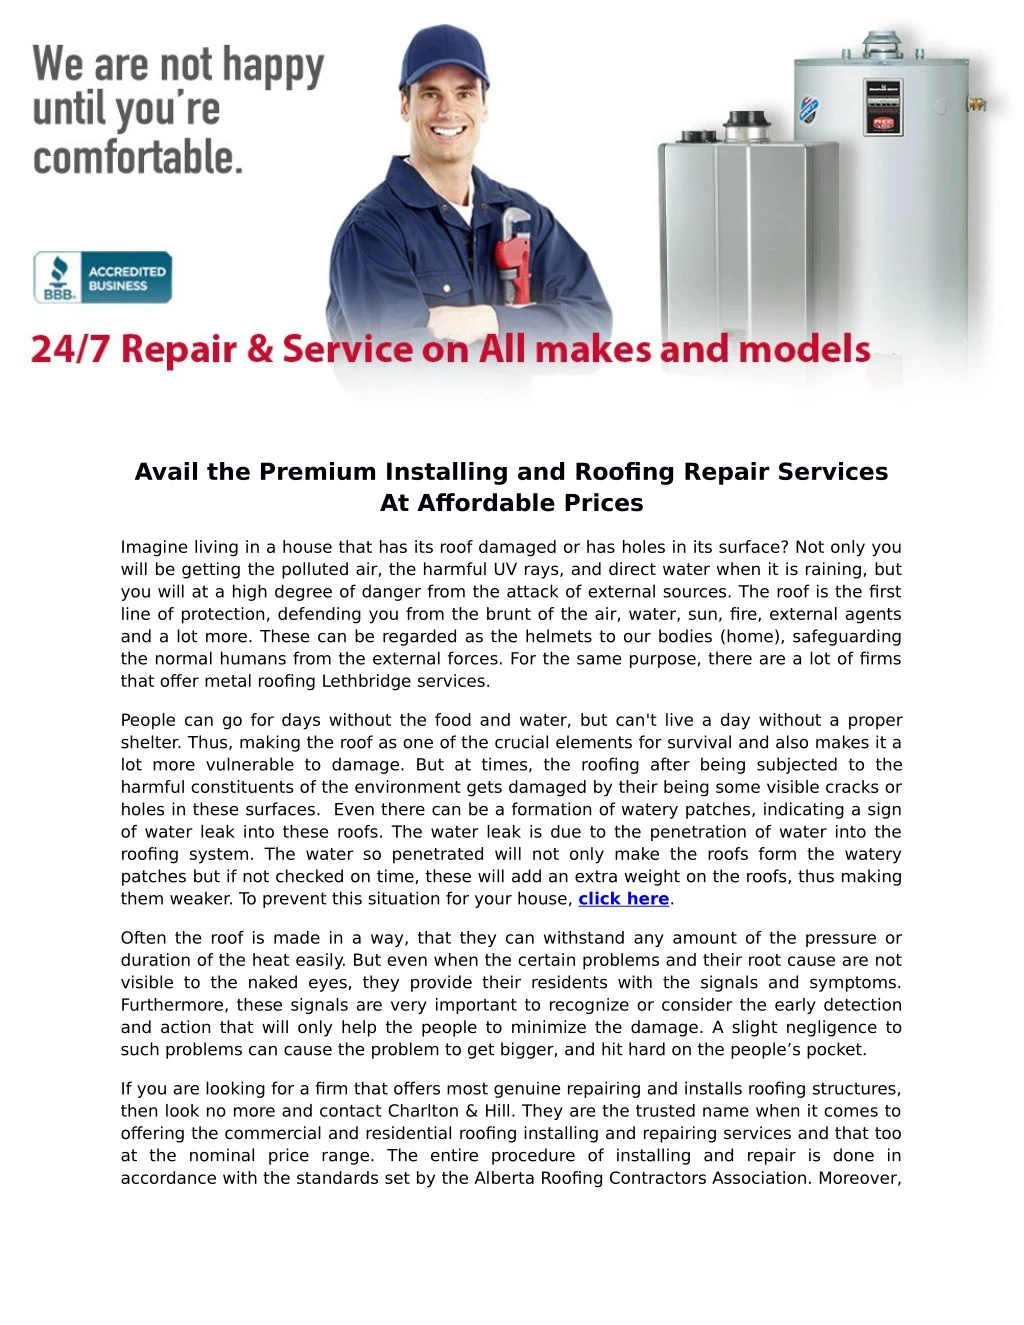 avail the premium installing and roofing repair